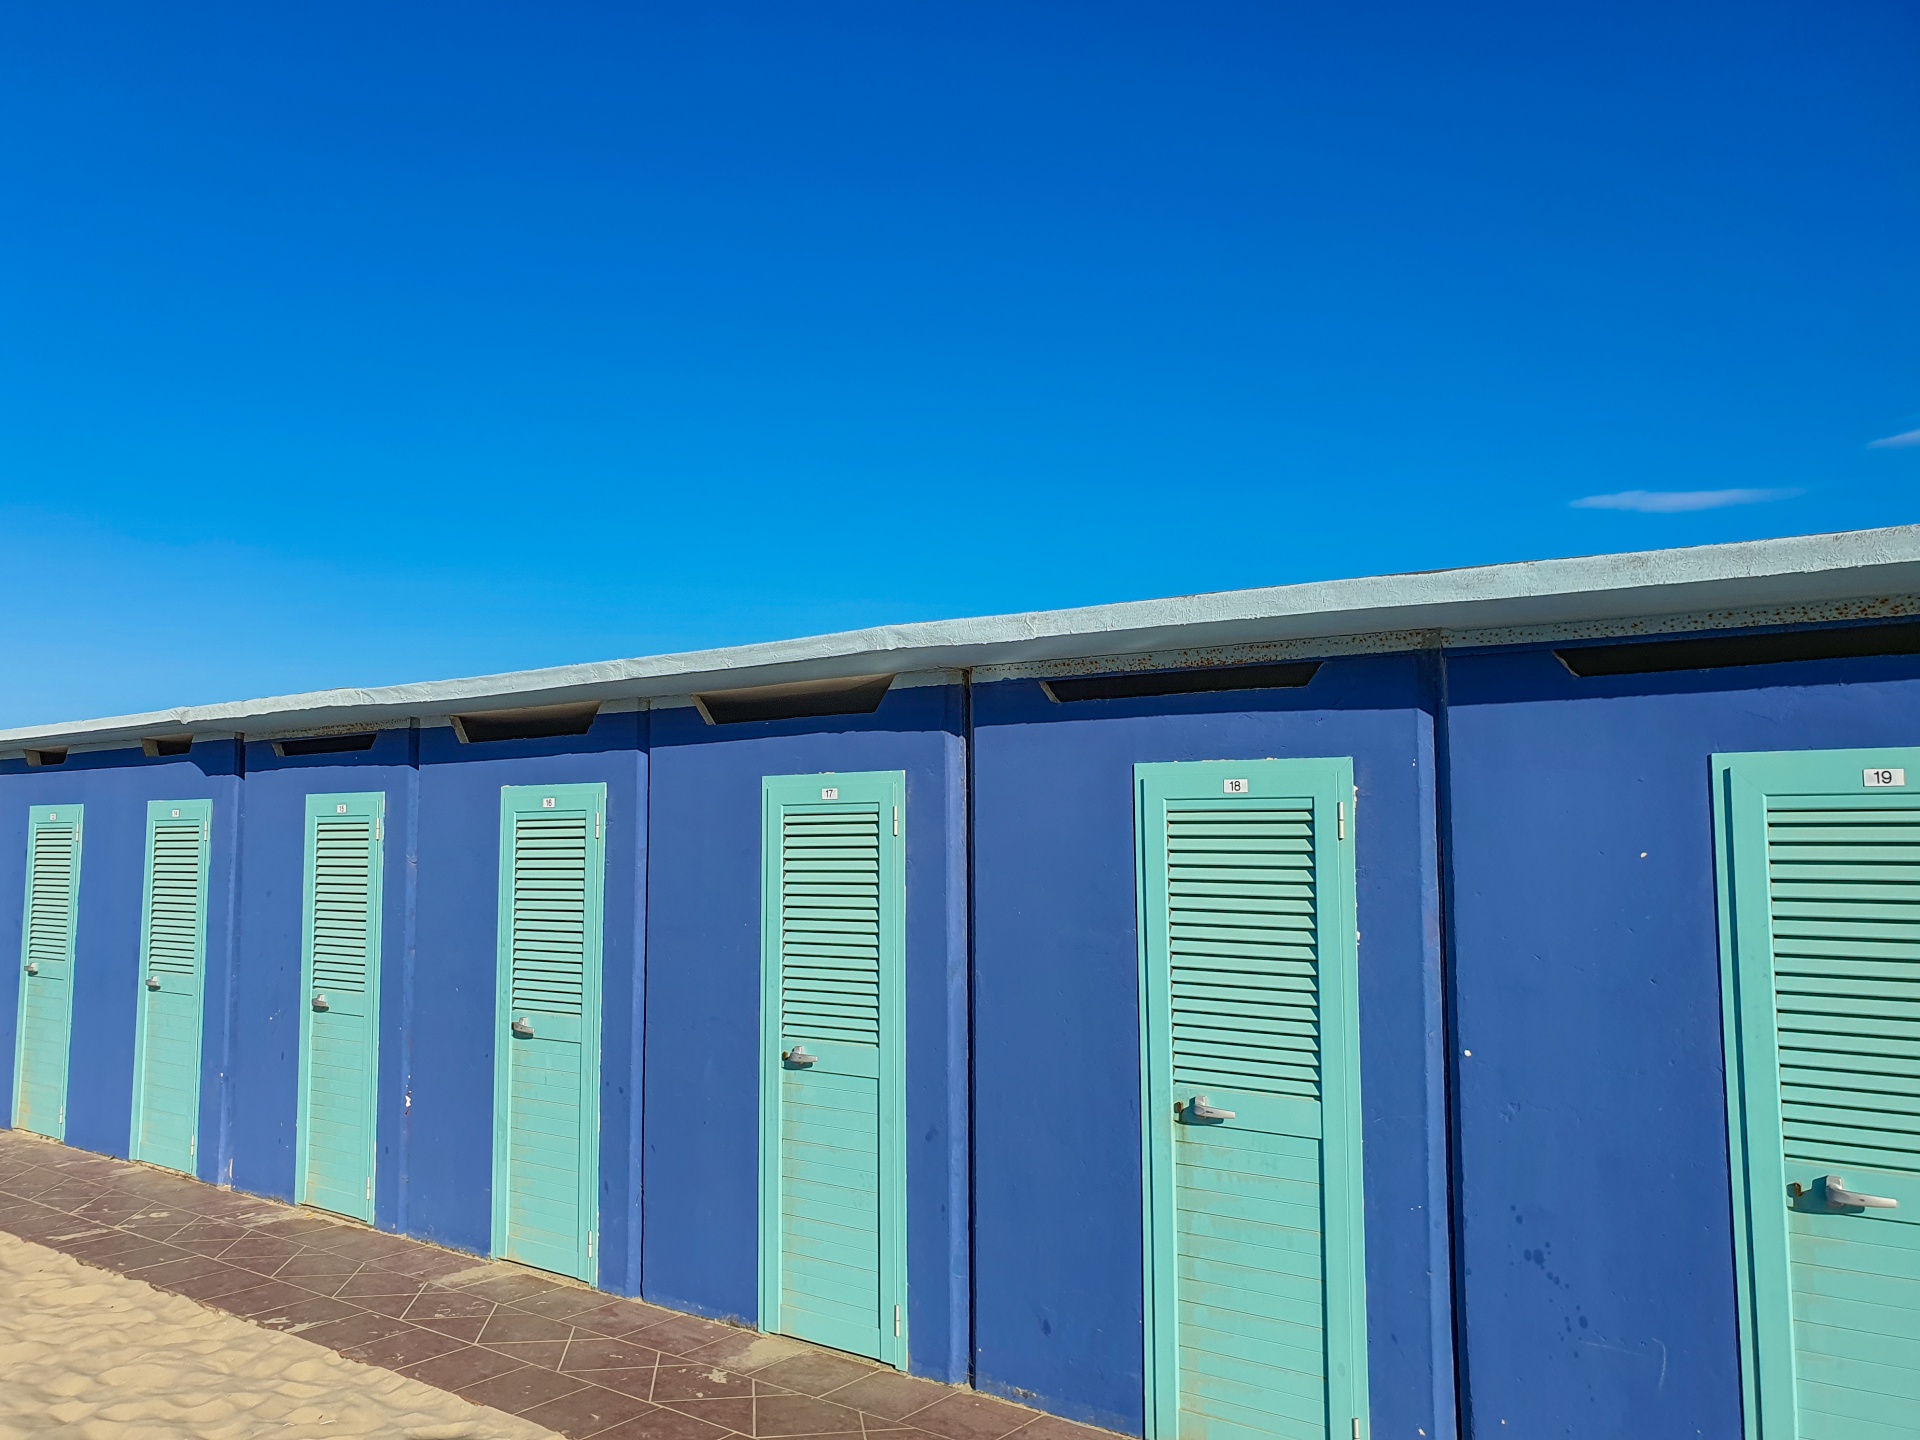 Changing Booths On The Beach Free Stock Photo - Public Domain Pictures